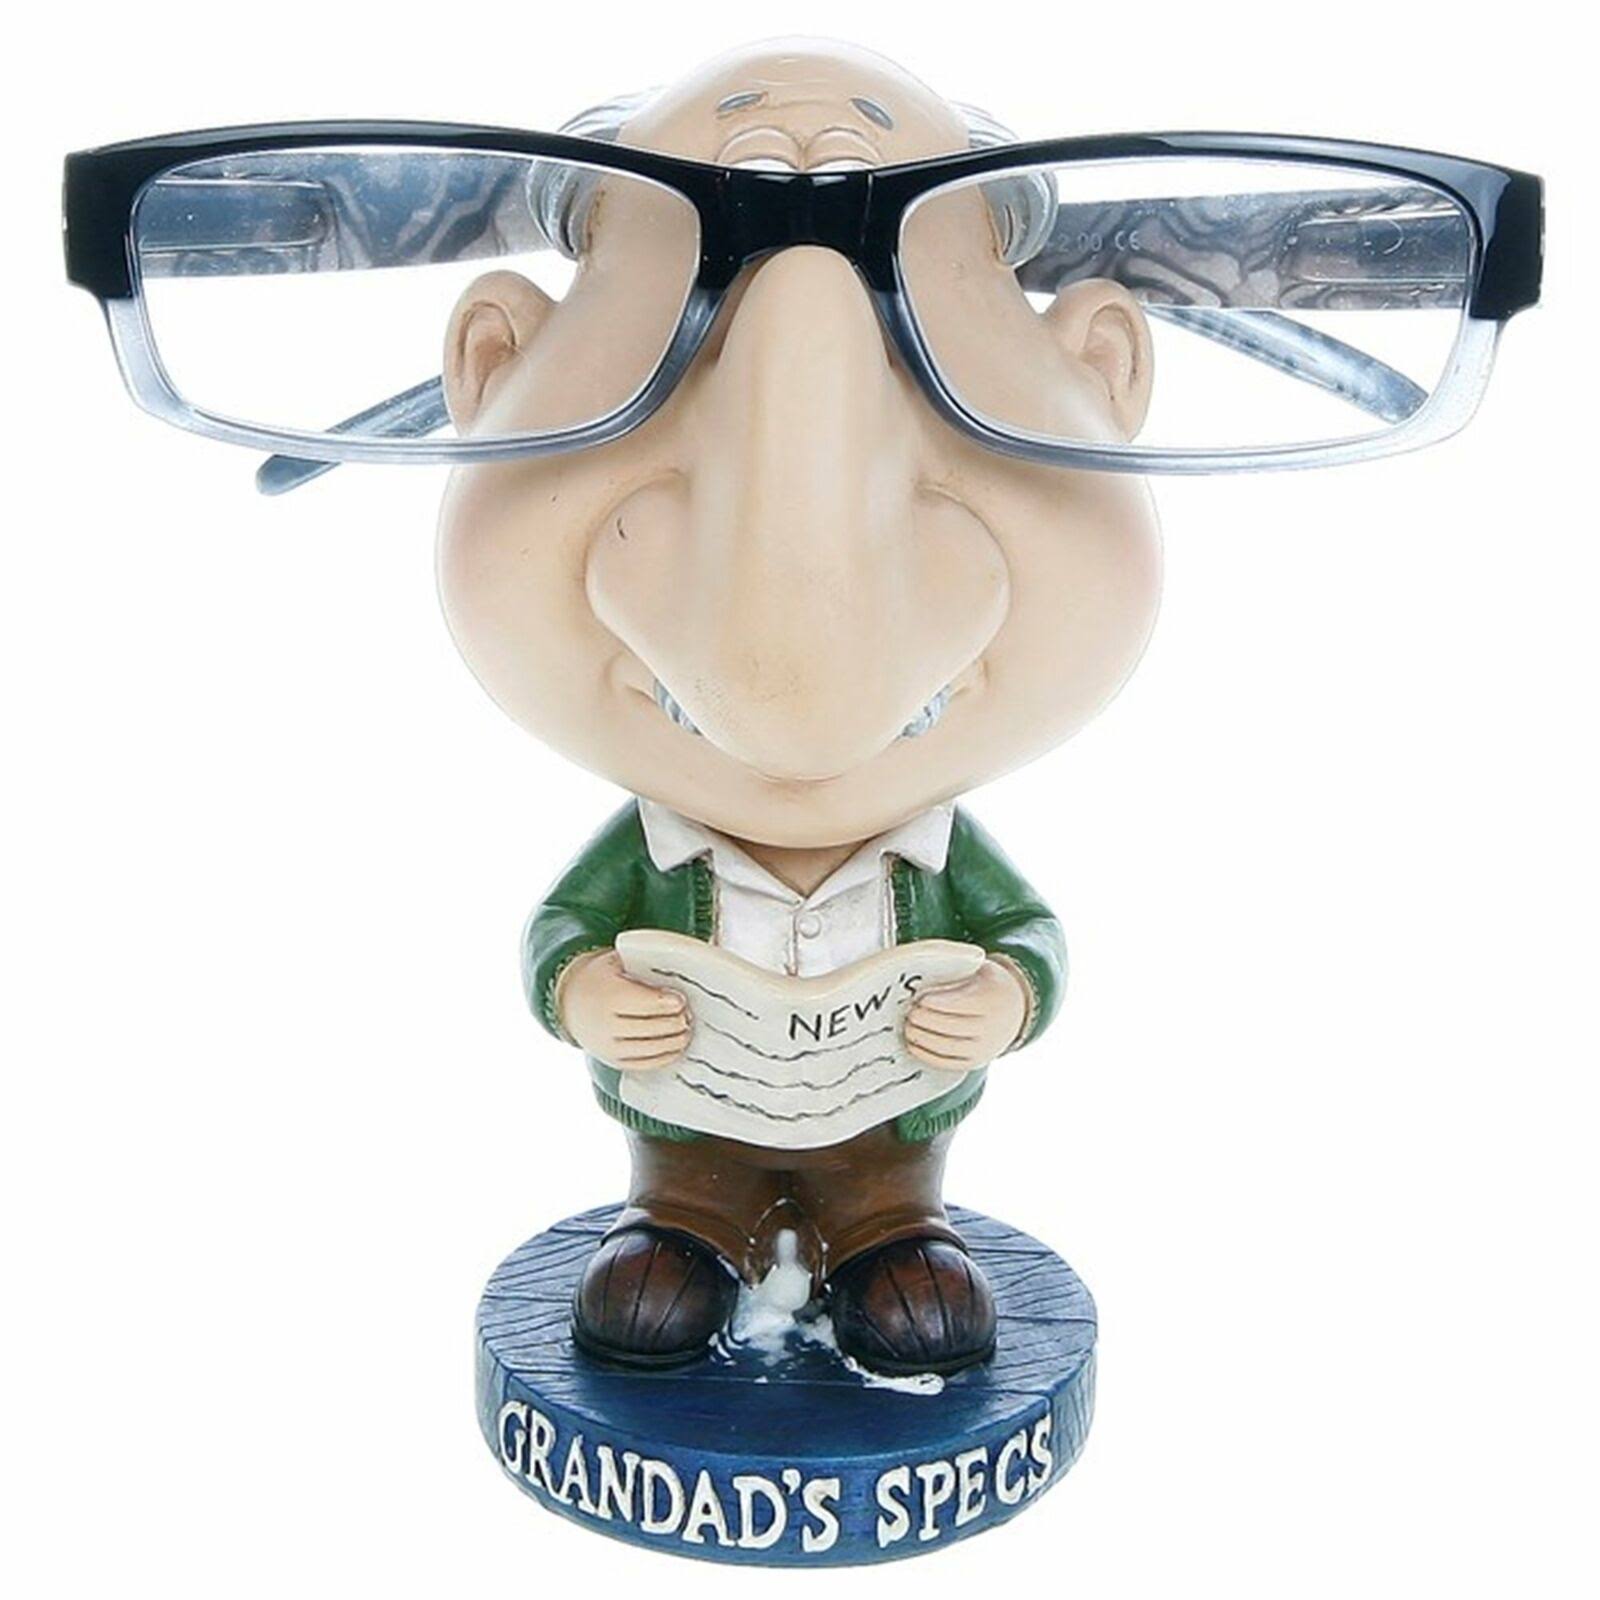 Comical Grandad Spectacles Glasses Stand Holder